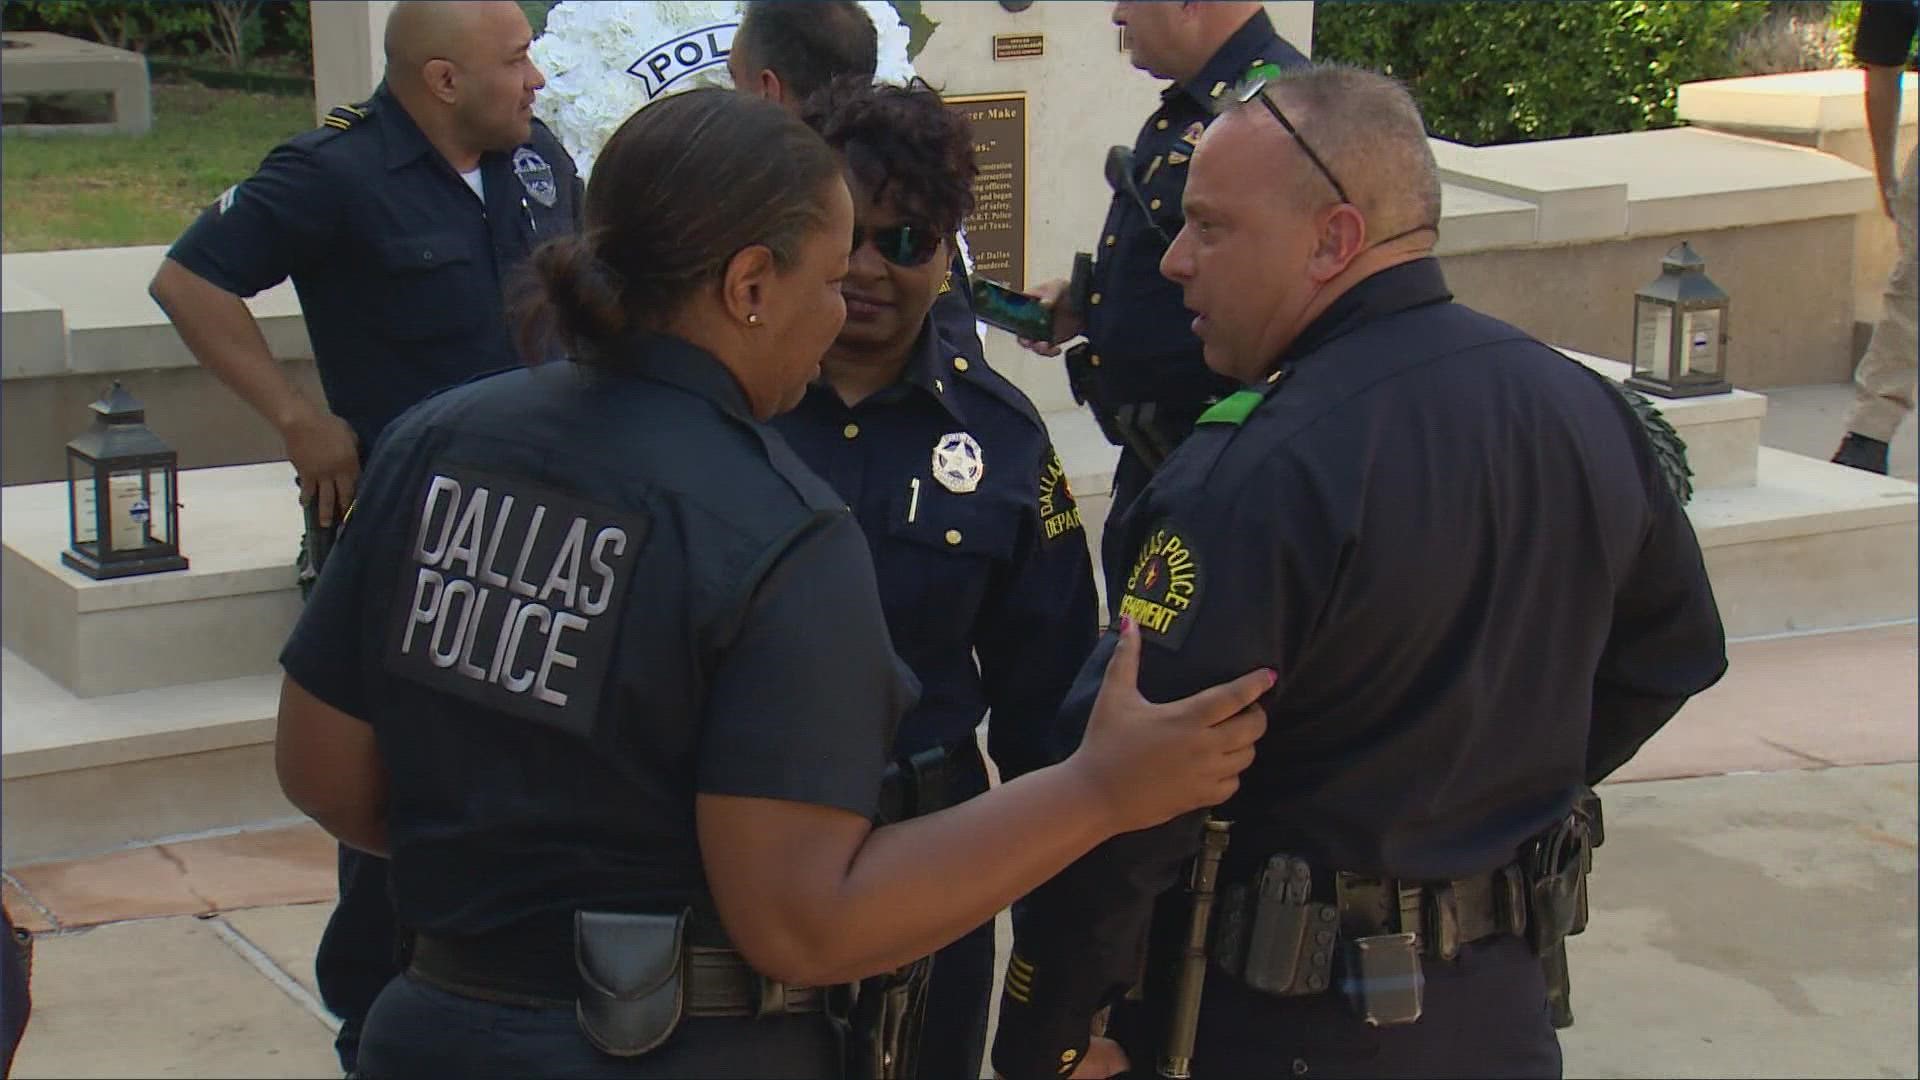 Dallas police say they are starting a unit to help officers get counseling if they need to talk about the tragedies and violence they see every day.